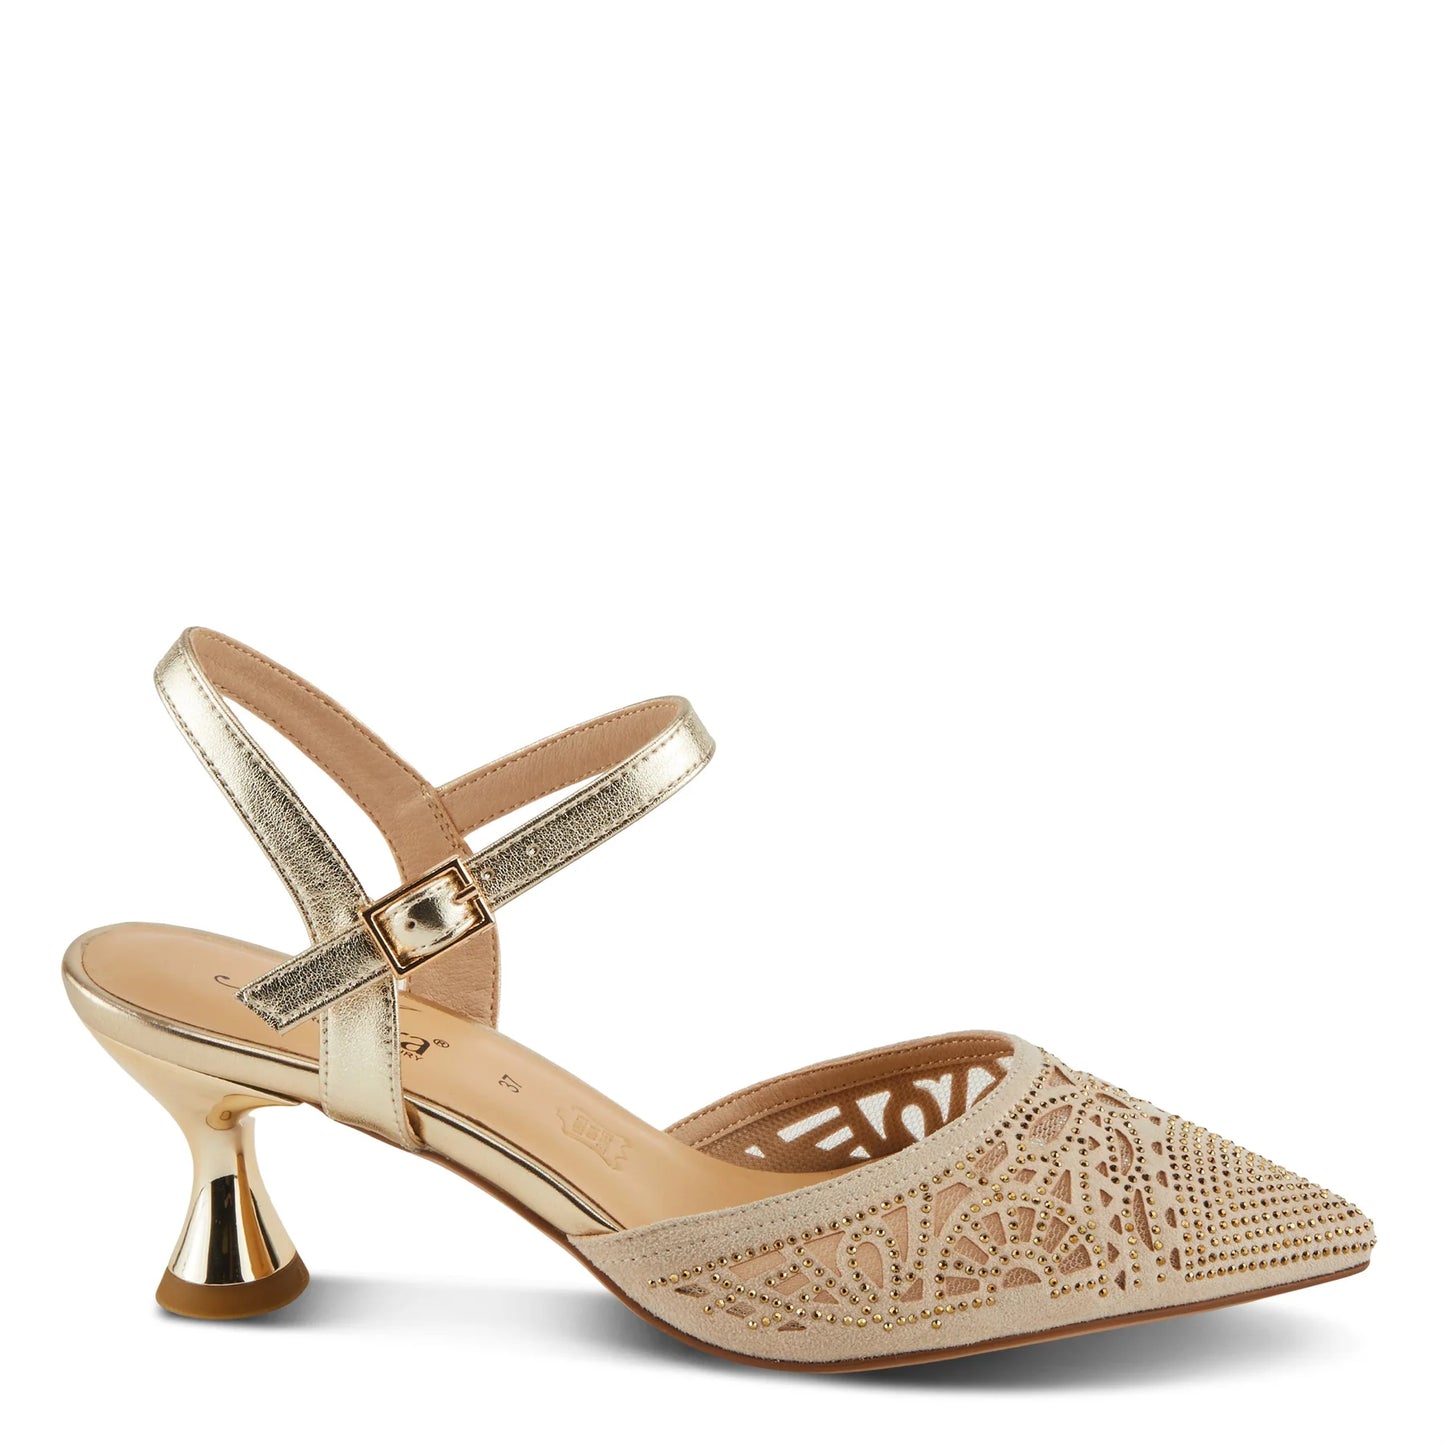 Azura by Spring Step Women's Delicate Sandals - Soft Gold